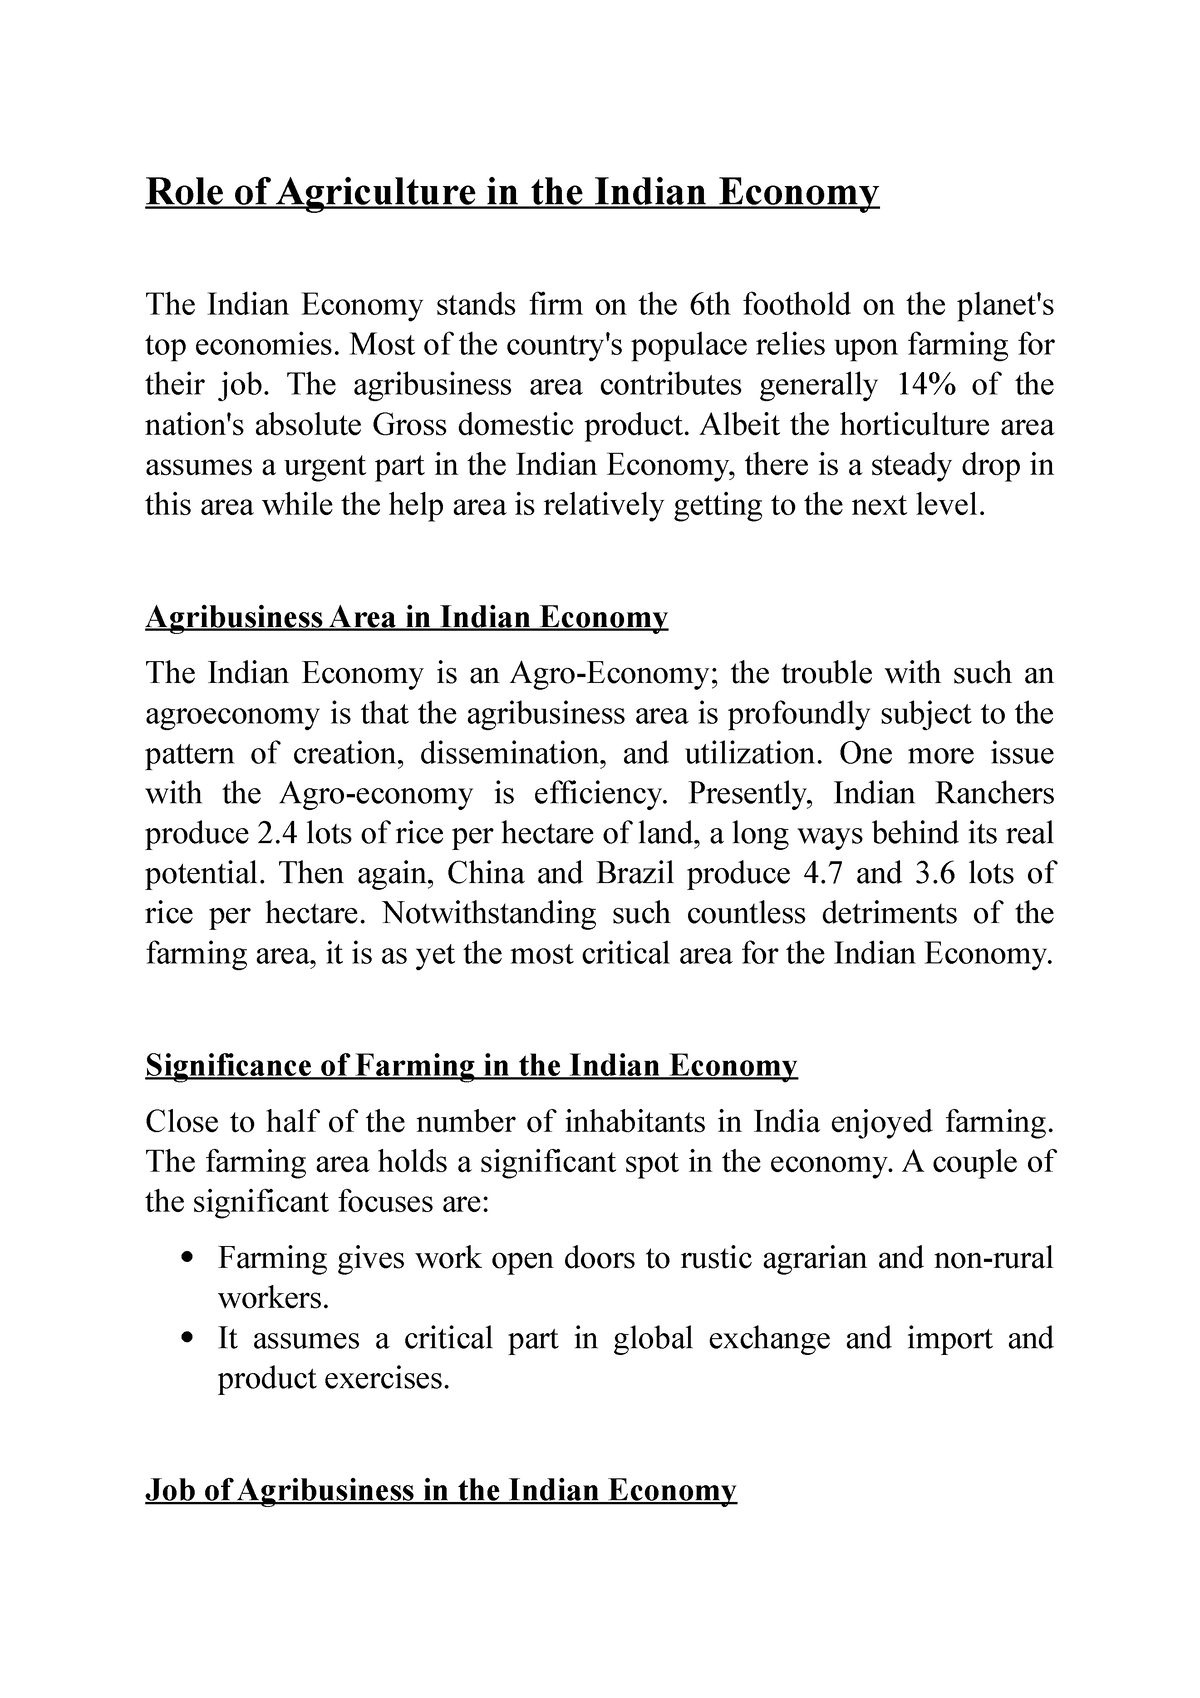 essay role of agriculture in indian economy